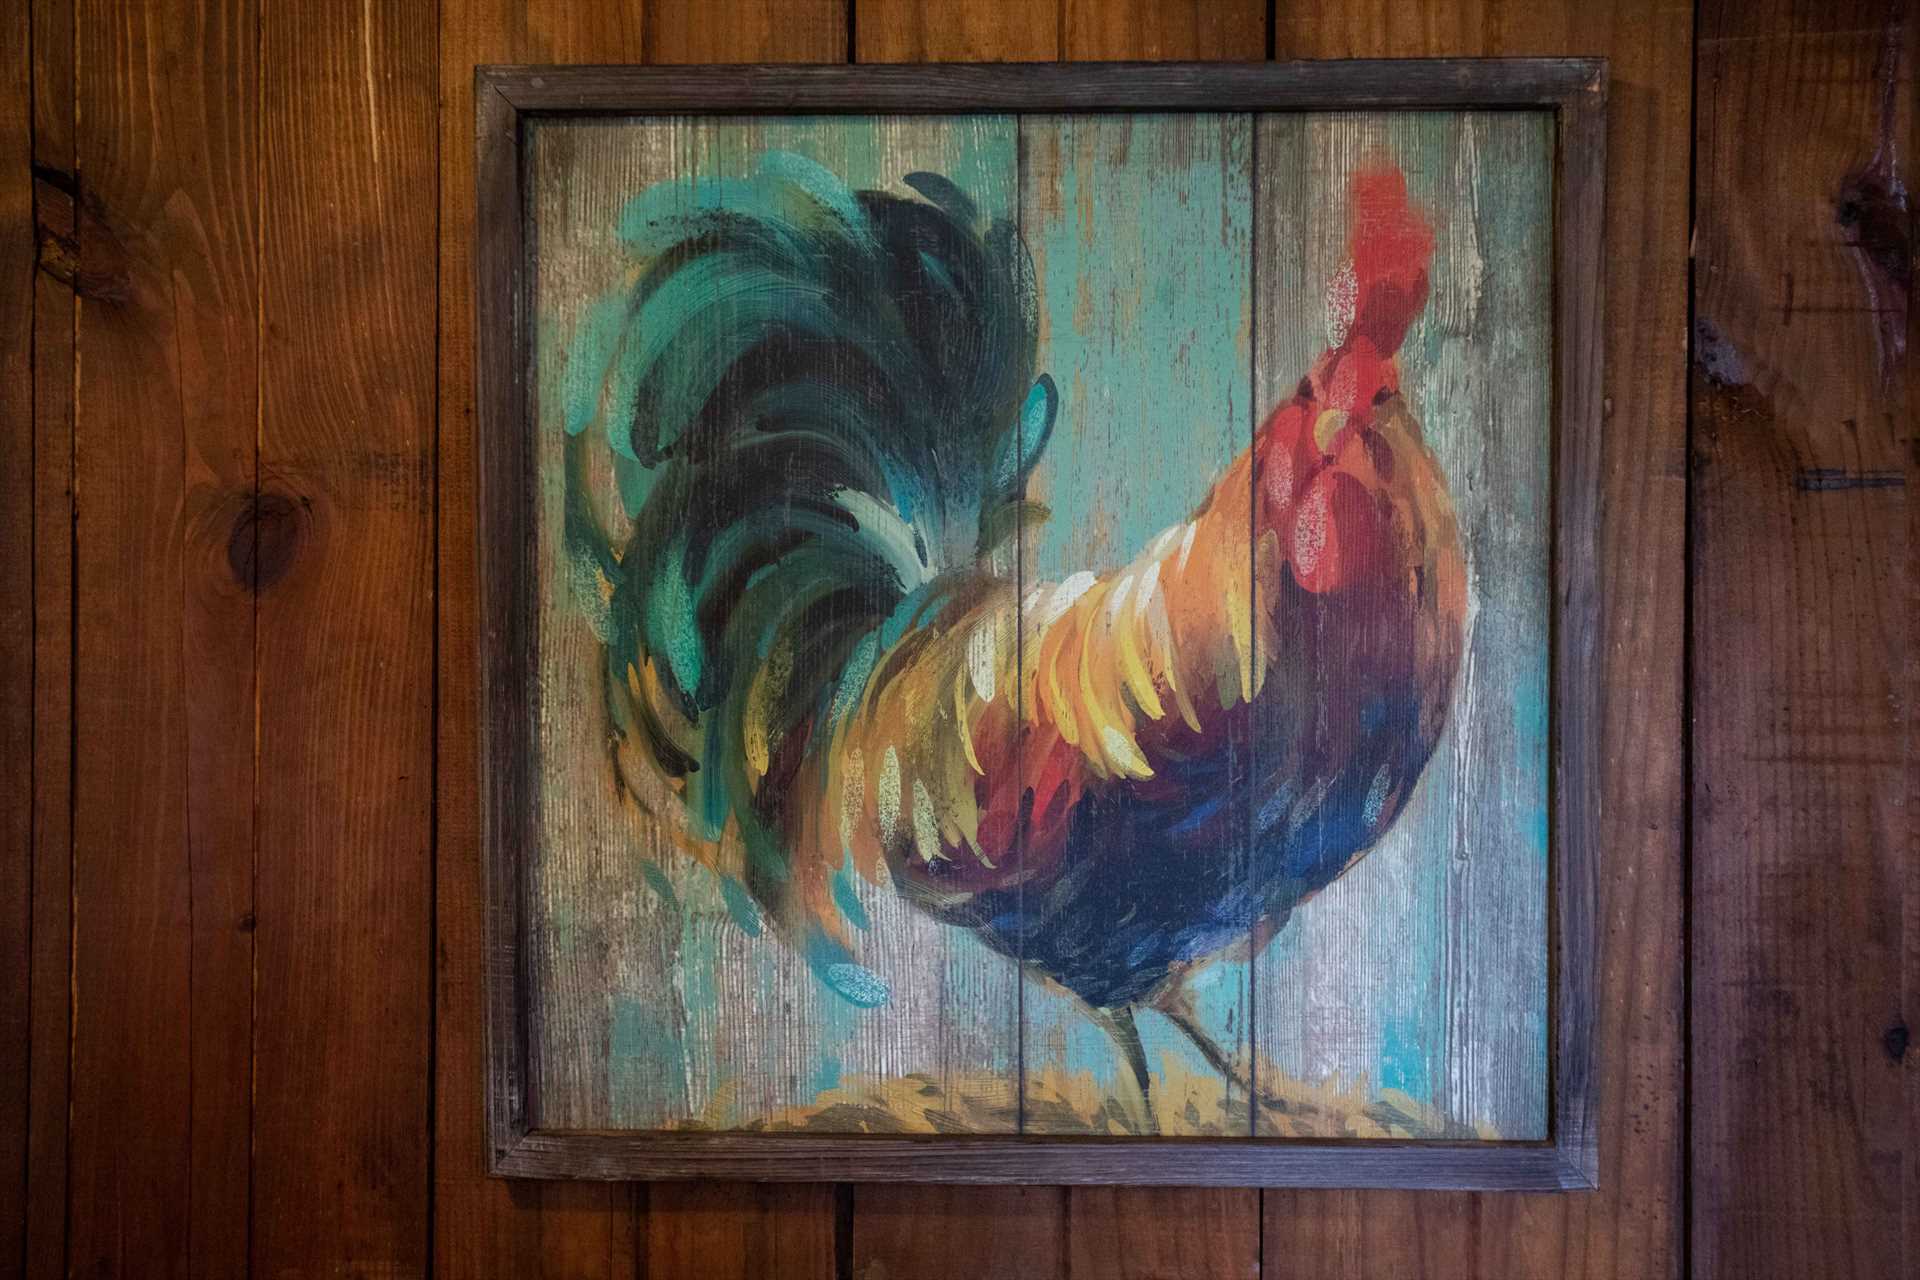                                                 This cocky fellow is just one of the original art pieces that adds to the peaceful country atmosphere at Medina Mountain.